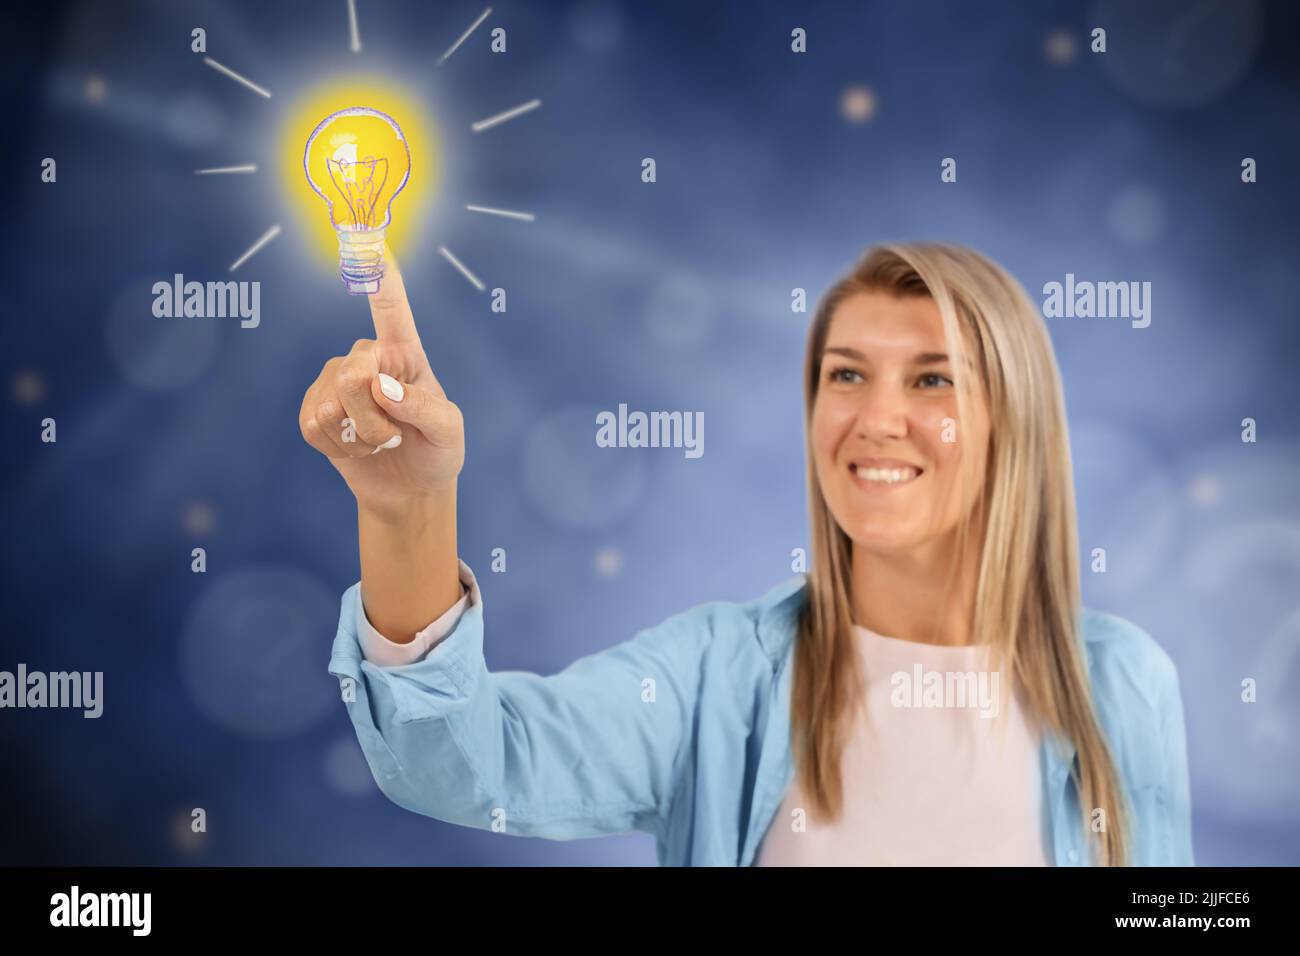 The girl clicks on the burning light bulb with an idea among the questions Stock Photo